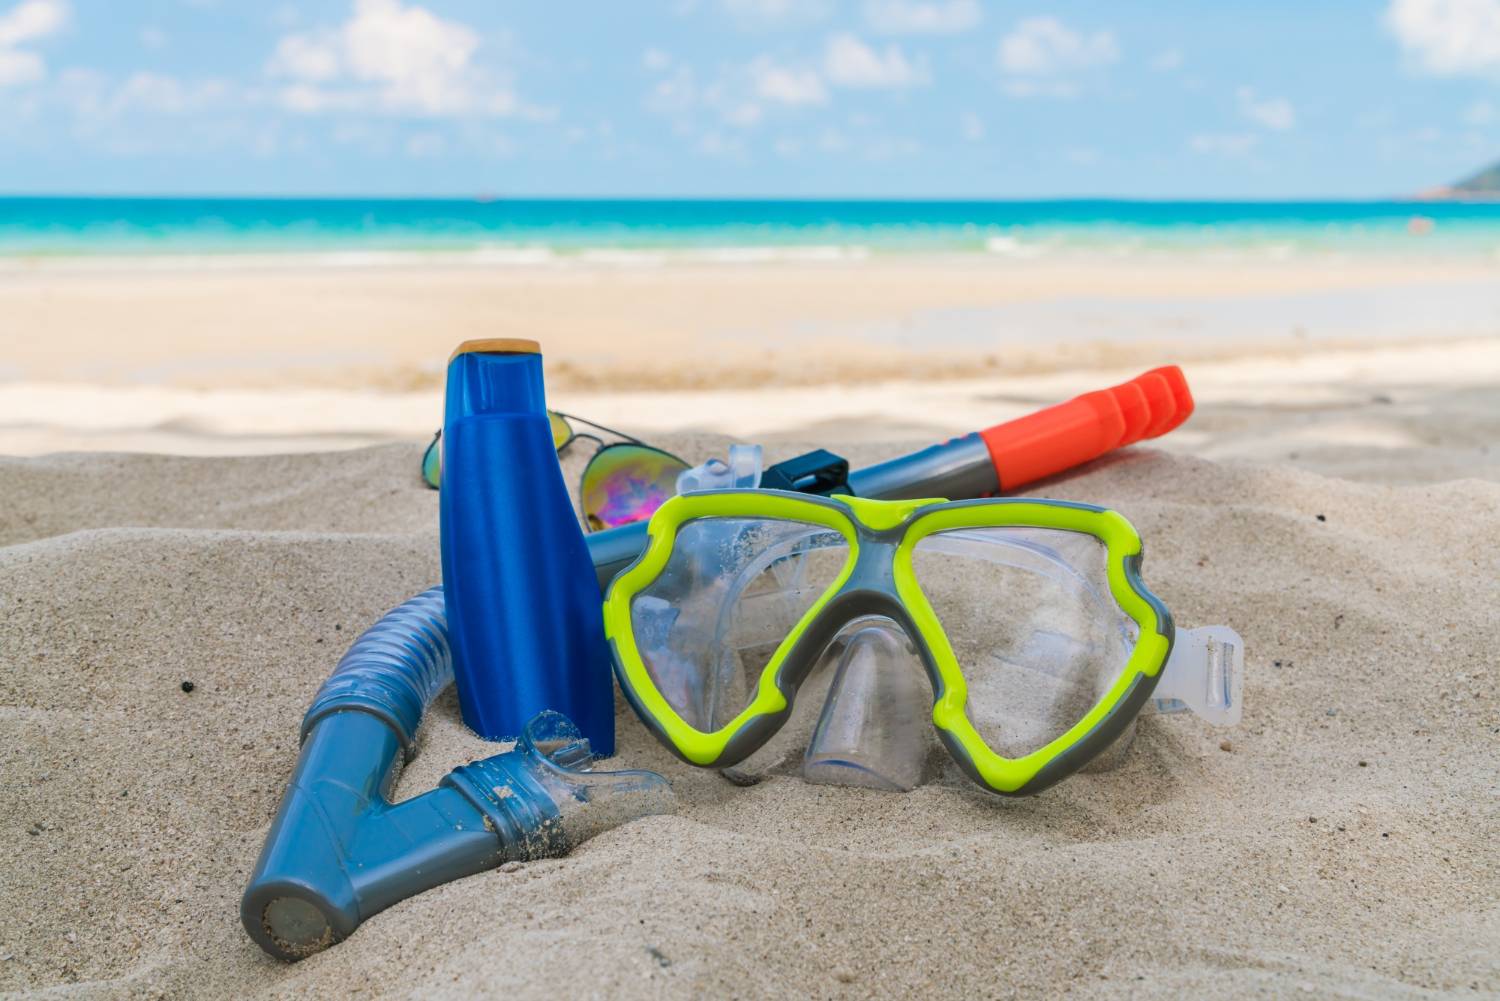 Snorkeling gear on the beach with clear blue waters in the background, ready for underwater exploration.